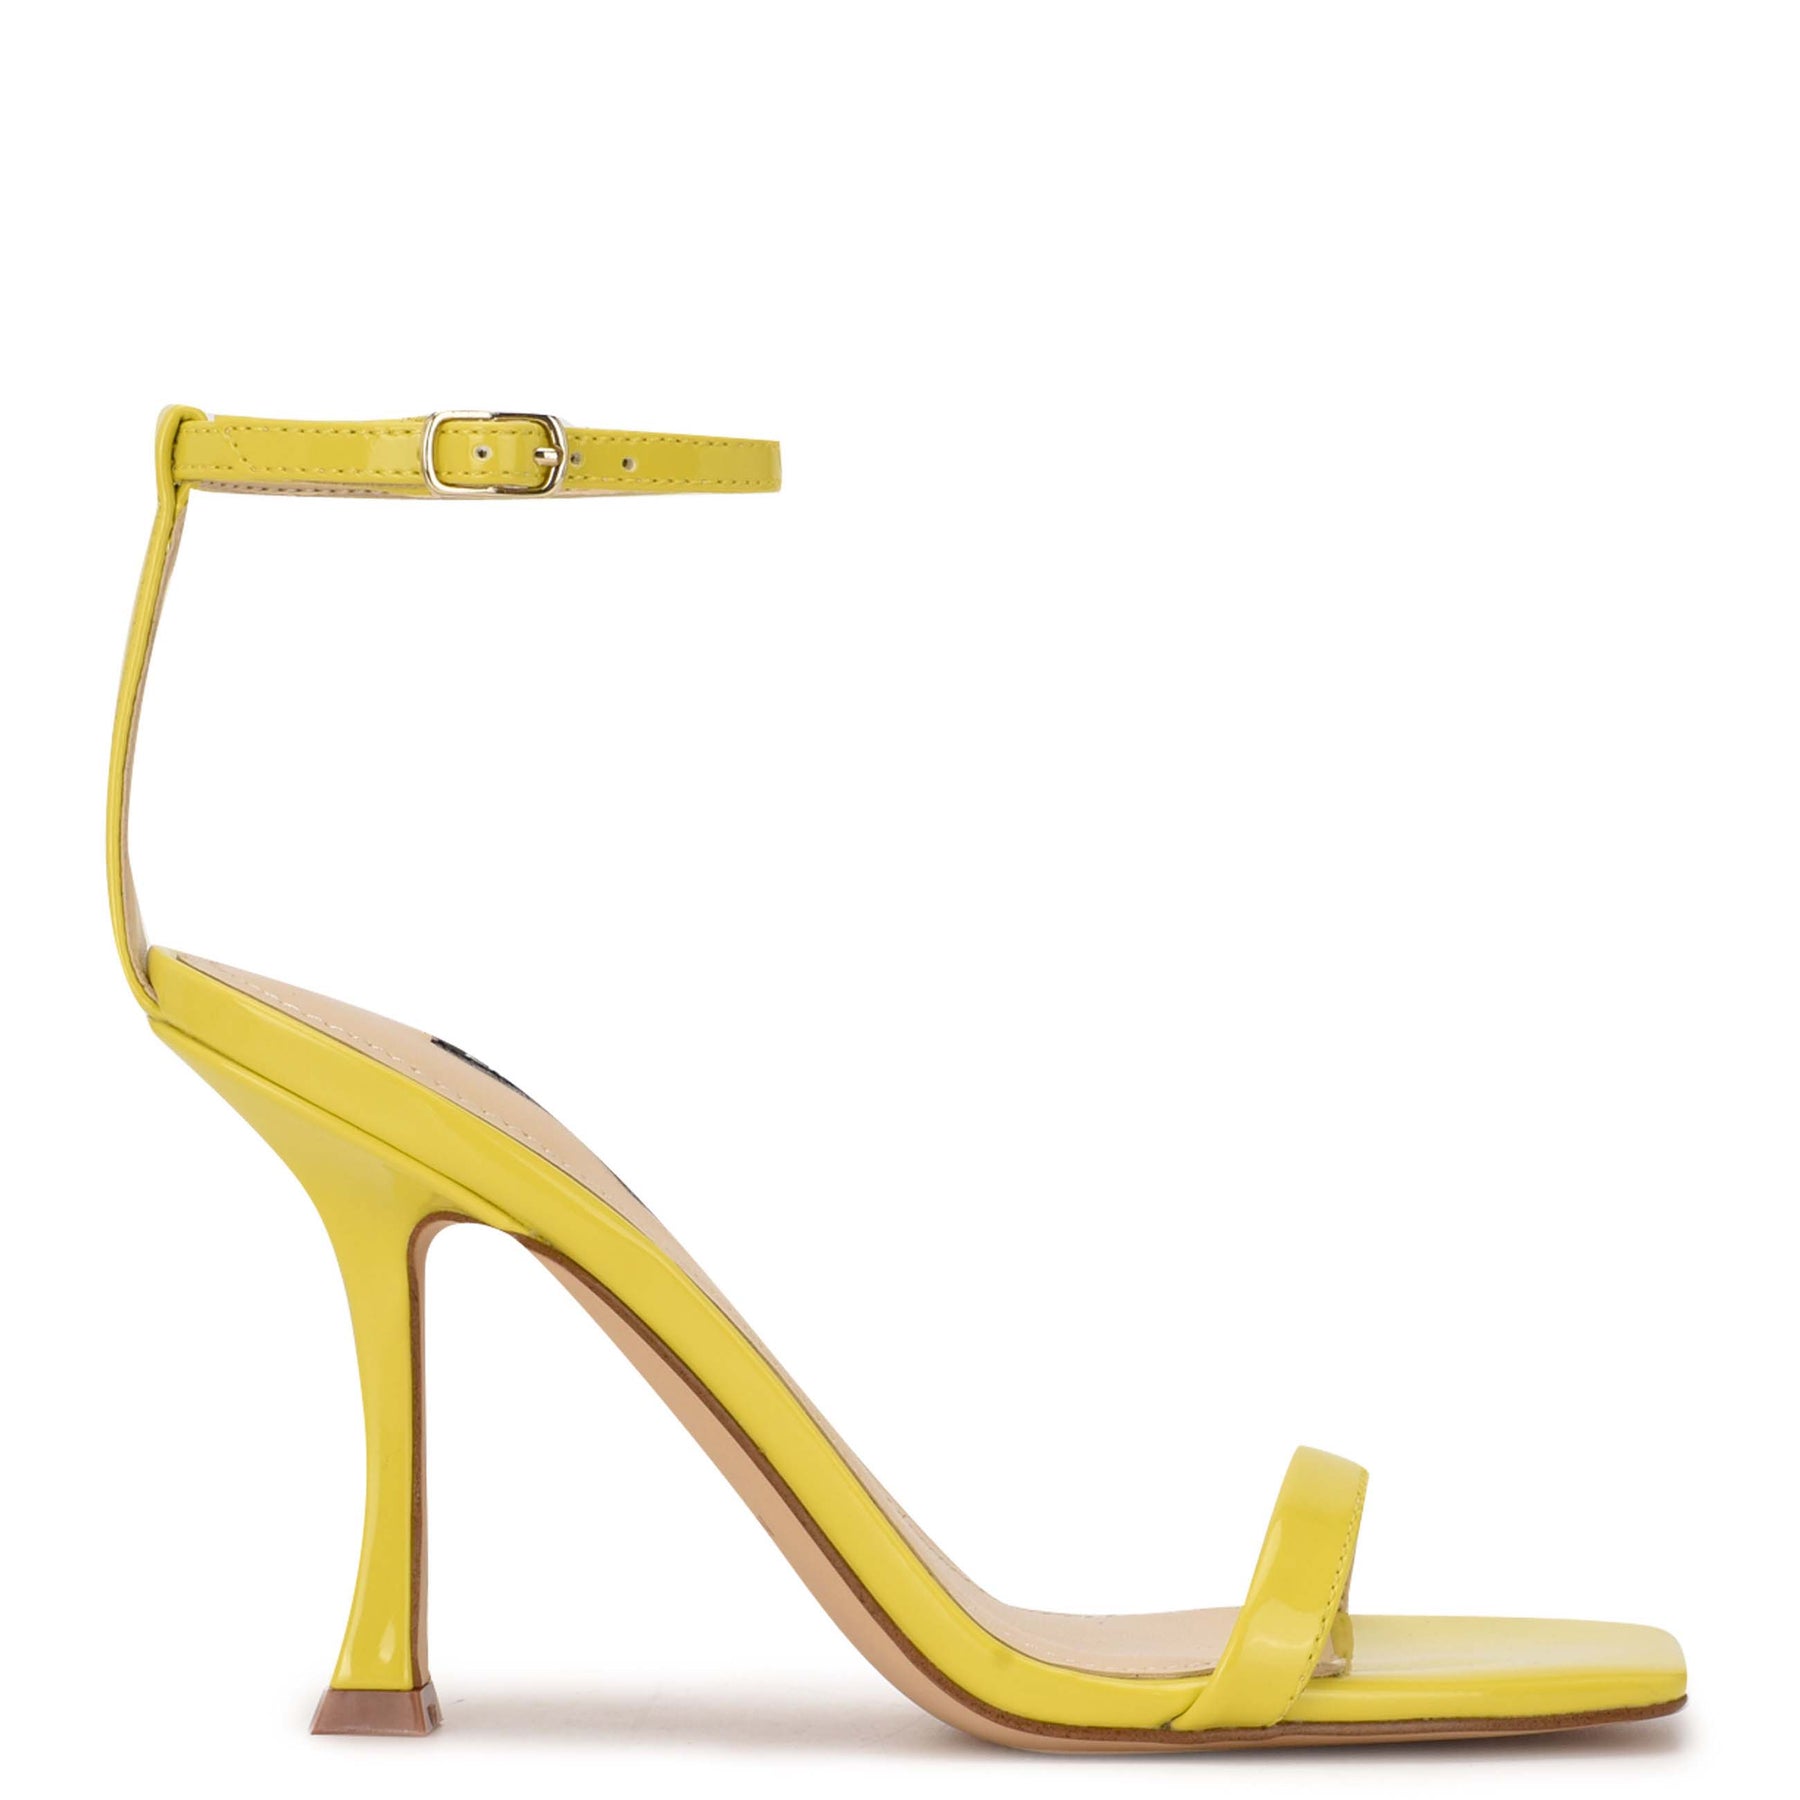 Sandals | Nine West comfortable and fashionable shoes and handbags for ...